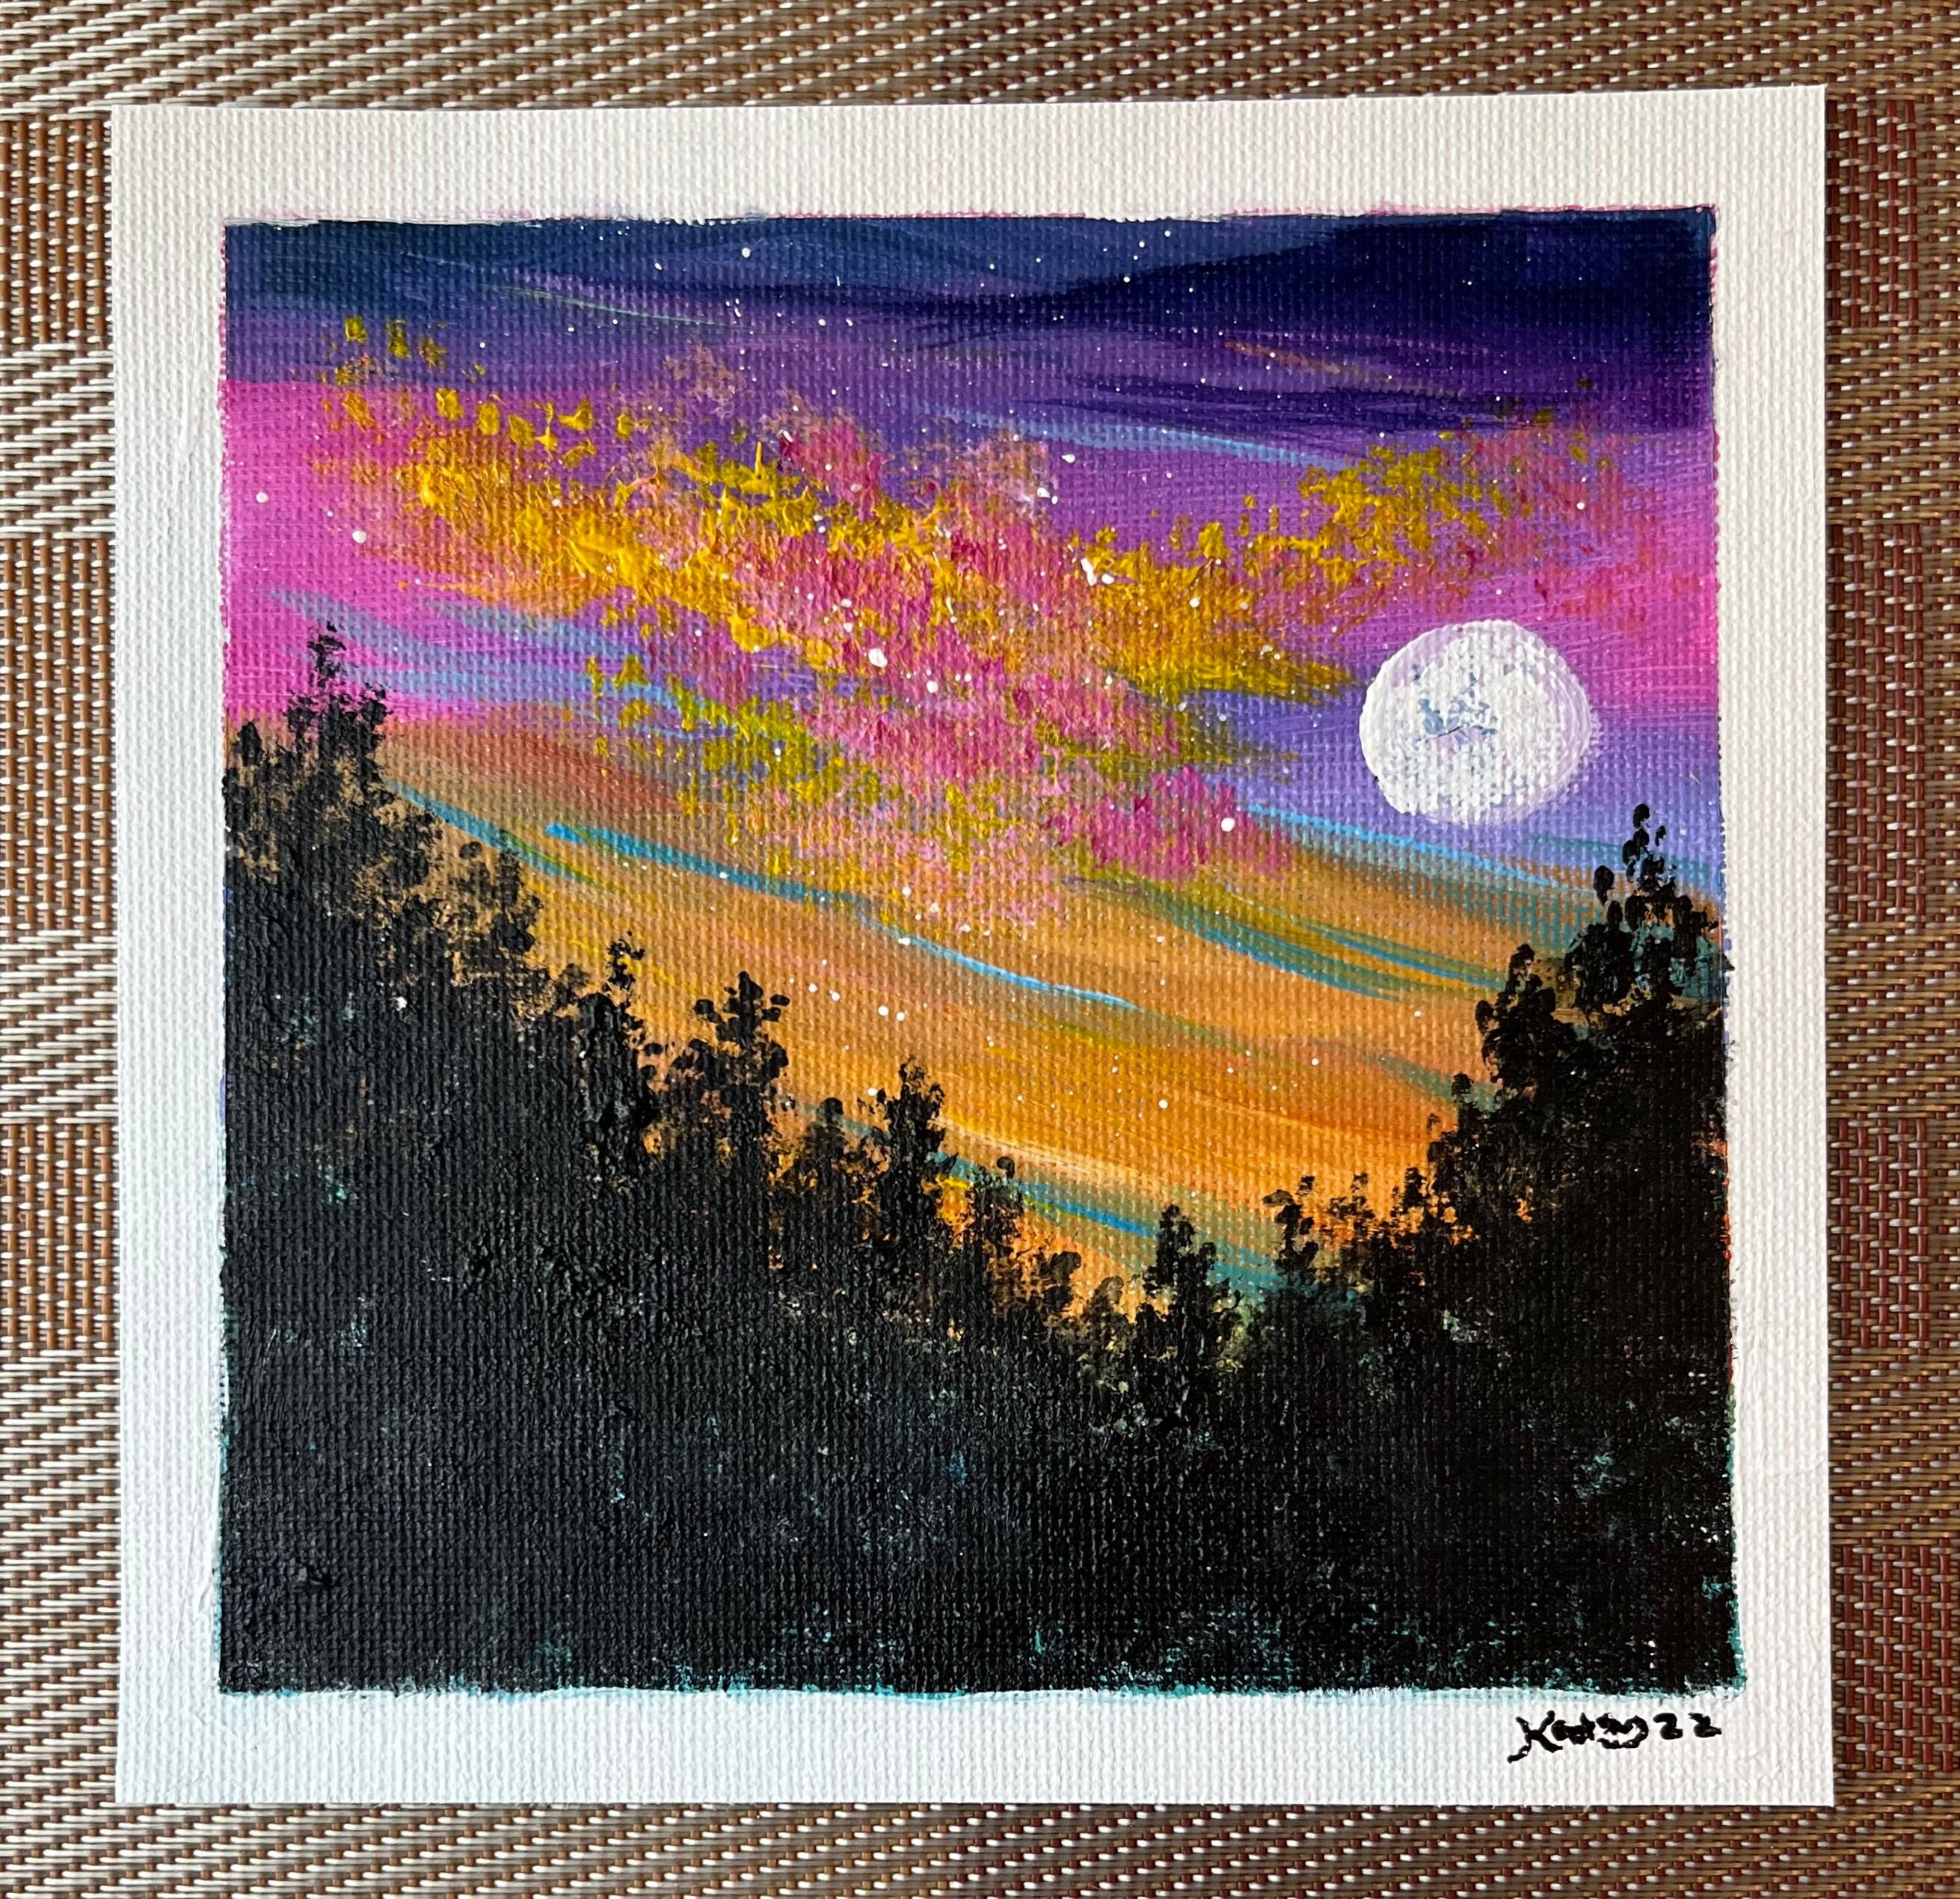 Original 11x14 Acrylic Painting on Canvas starry Night Forest Full Moon,  Celestial Stars, Forest Trees 